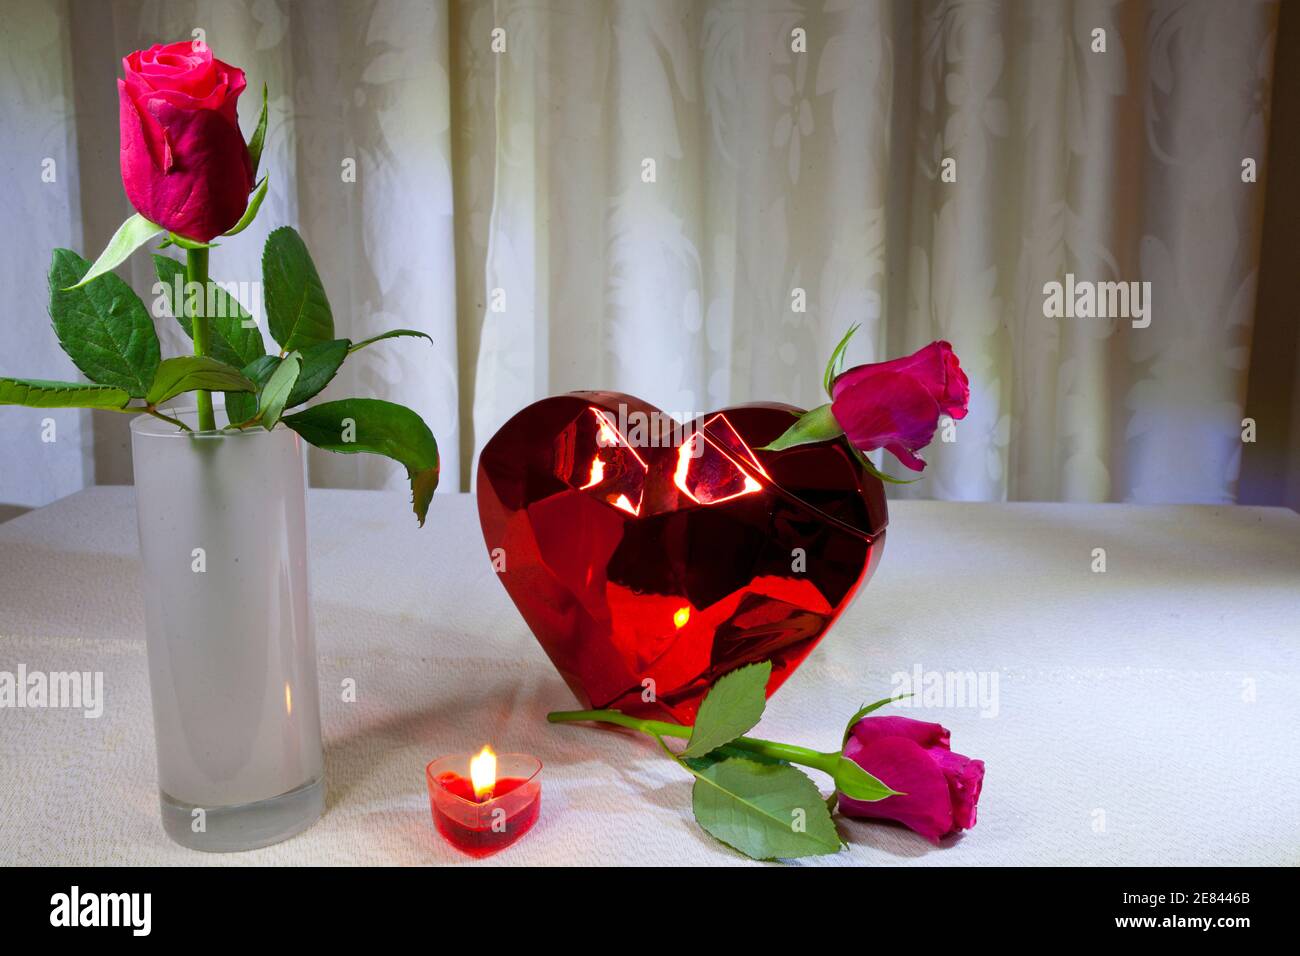 The red rose is a symbol for love and romance; Valentine's Day is ...